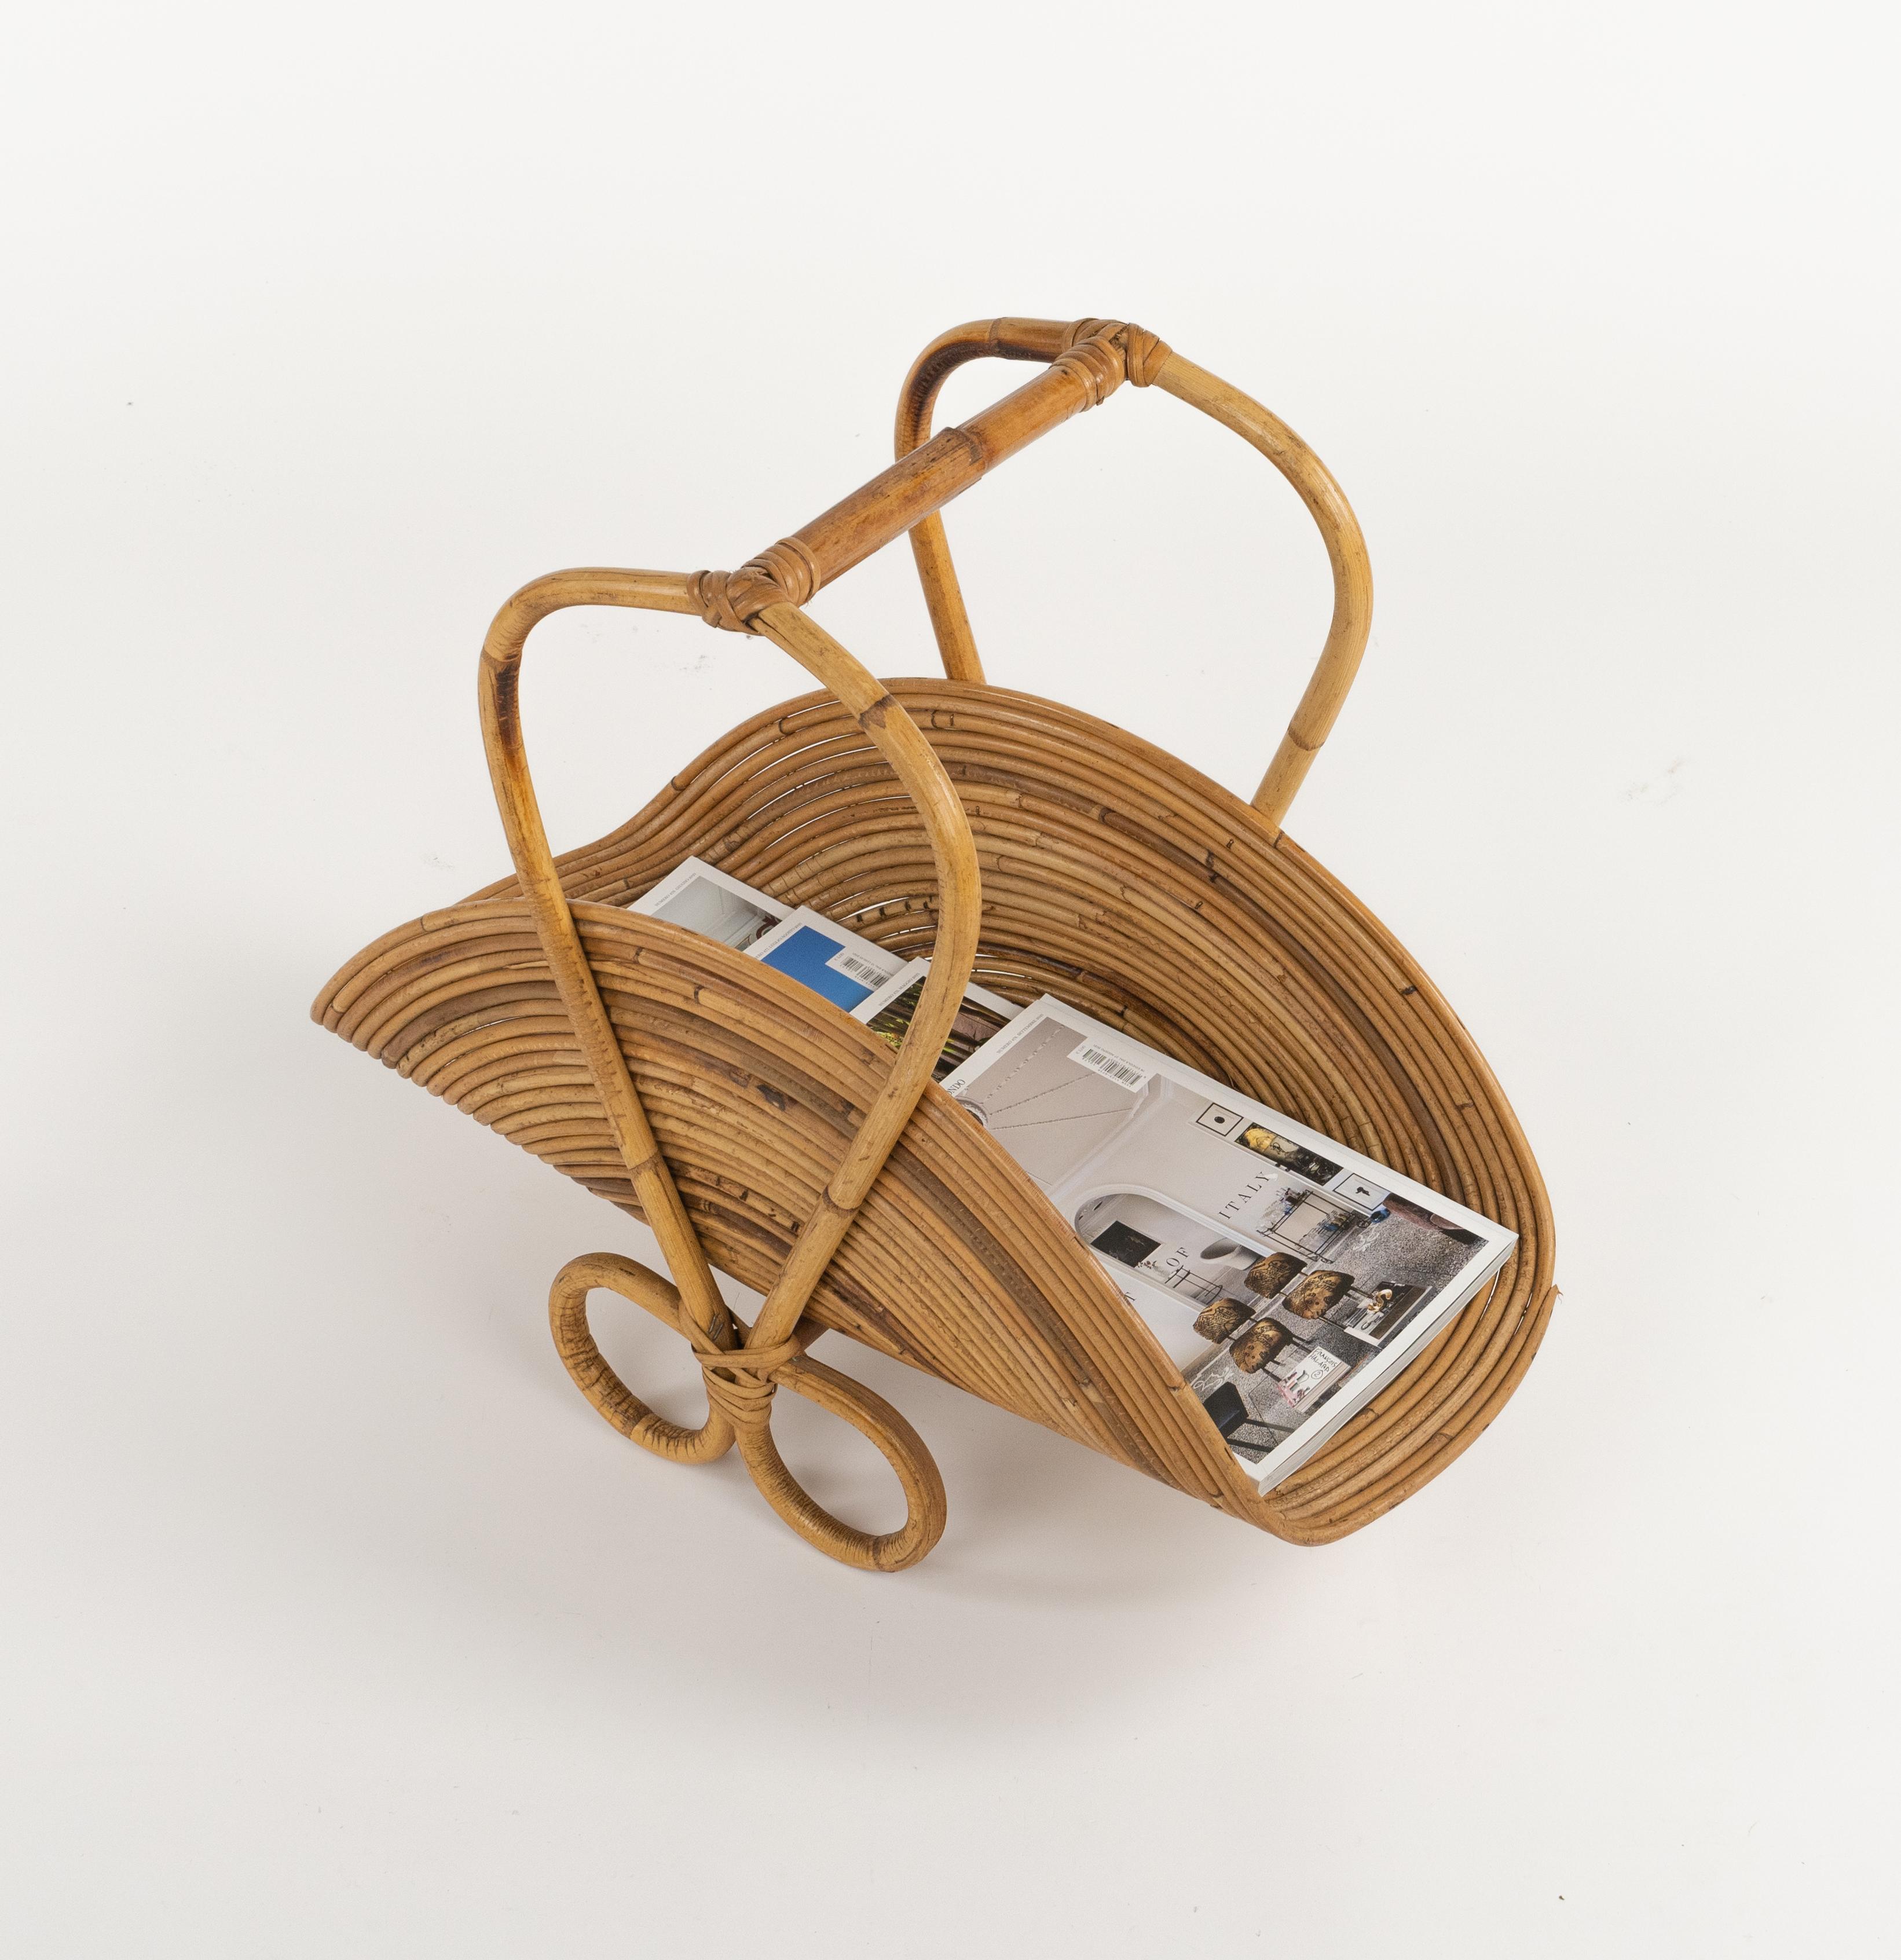 Midcentury Bamboo and Rattan Magazine Rack Vivai Del Sud Style, Italy 1960s For Sale 1